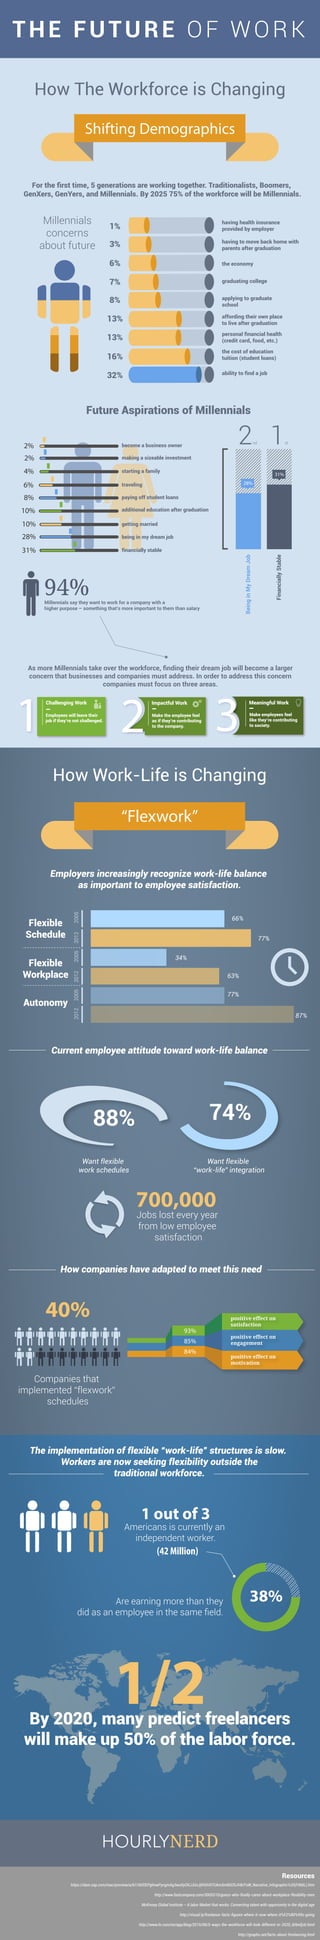 HOURLYNERD
How Work-Life is Changing
“Flexwork”
Flexible
Schedule
Flexible
Workplace
Autonomy
66%
77%
34%
63%
77%
87%
200520122005201220052012
How companies have adapted to meet this need
40%
Companies that
implemented “flexwork”
schedules
74%88%
positive effect on
satisfaction
93%
85%
84%
positive effect on
engagement
positive effect on
motivation
Want flexible
“work-life” integration
Want flexible
work schedules
2
Impactful Work
Make the employee feel
as if they’re contributing
to the company.
1
Challenging Work
Employees will leave their
job if they’re not challenged.
700,000Jobs lost every year
from low employee
satisfaction
How The Workforce is Changing
For the ﬁrst time, 5 generations are working together. Traditionalists, Boomers,
GenXers, GenYers, and Millennials. By 2025 75% of the workforce will be Millennials.
having health insurance
provided by employer
having to move back home with
parents after graduation
the economy
graduating college
applying to graduate
school
affording their own place
to live after graduation
personal ﬁnancial health
(credit card, food, etc.)
the cost of education
tuition (student loans)
ability to ﬁnd a job
1%
3%
6%
7%
8%
13%
13%
16%
32%
2%
2%
4%
6%
8%
10%
Millennials
concerns
about future
10%
28%
31%
31%
28%
BeinginMyDreamJob
FinanciallyStable
become a business owner
making a sizeable investment
starting a family
traveling
paying off student loans
additional education after graduation
getting married
being in my dream job
ﬁnancially stable
Future Aspirations of Millennials
94%Millennials say they want to work for a company with a
higher purpose – something that’s more important to them than salary
2nd 1st
As more Millennials take over the workforce, ﬁnding their dream job will become a larger
concern that businesses and companies must address. In order to address this concern
companies must focus on three areas.
3
Meaningful Work
Make employees feel
like they’re contributing
to society.
Are earning more than they
did as an employee in the same ﬁeld.
THE FUTURE OF WORK
Shifting Demographics
1 out of 3
Americans is currently an
independent worker.
(42 Million)
38%
https://dam.sap.com/mac/preview/a/67/AEElEPglmwPyngmAg3wxXyOXJJUnJjlHOHSTUAmSm8SOSJH8/FoW_Narrative_Infographic%20(FINAL).htm
http://www.fastcompany.com/3005510/guess-who-ﬁnally-cares-about-workplace-flexibility-men
McKinsey Global Institute – A labor Market that works: Connecting talent with opportunity in the digital age
http://visual.ly/freelance-facts-ﬁgures-where-it-now-where-it%E2%80%99s-going
http://www.hr.com/en/app/blog/2015/06/5-ways-the-workforce-will-look-different-in-2020_ib9mfjz6.html
http://graphs.net/facts-about-freelancing.html
Resources
Employers increasingly recognize work-life balance
as important to employee satisfaction.
Current employee attitude toward work-life balance
The implementation of flexible “work-life” structures is slow.
Workers are now seeking flexibility outside the
traditional workforce.
1/2By 2020, many predict freelancers
will make up 50% of the labor force.
 